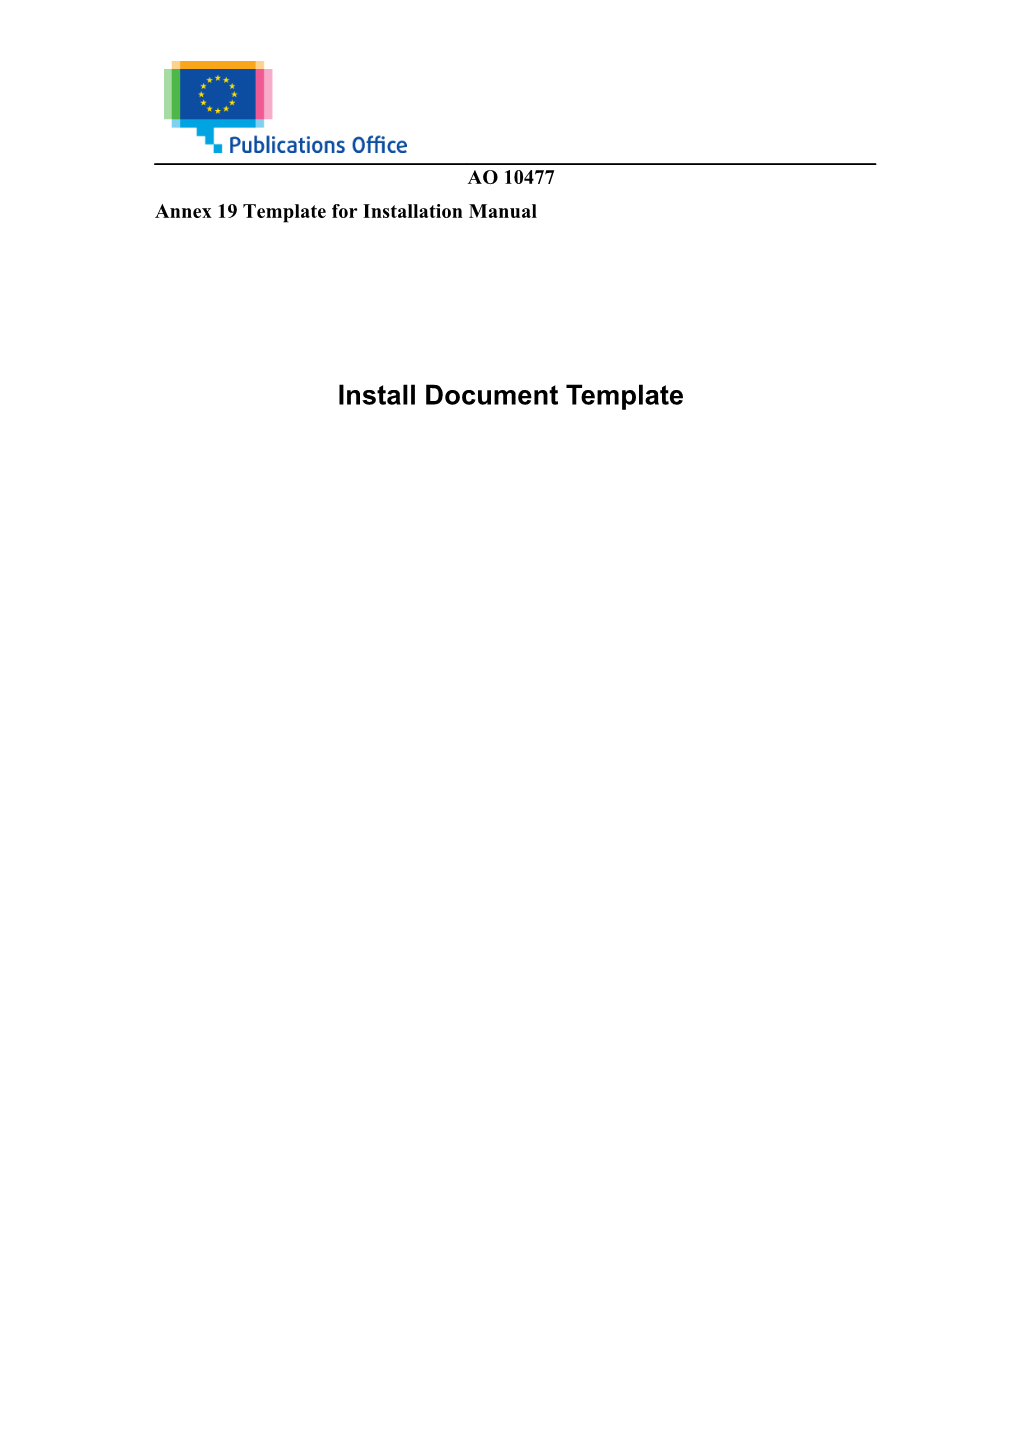 Install Document Template